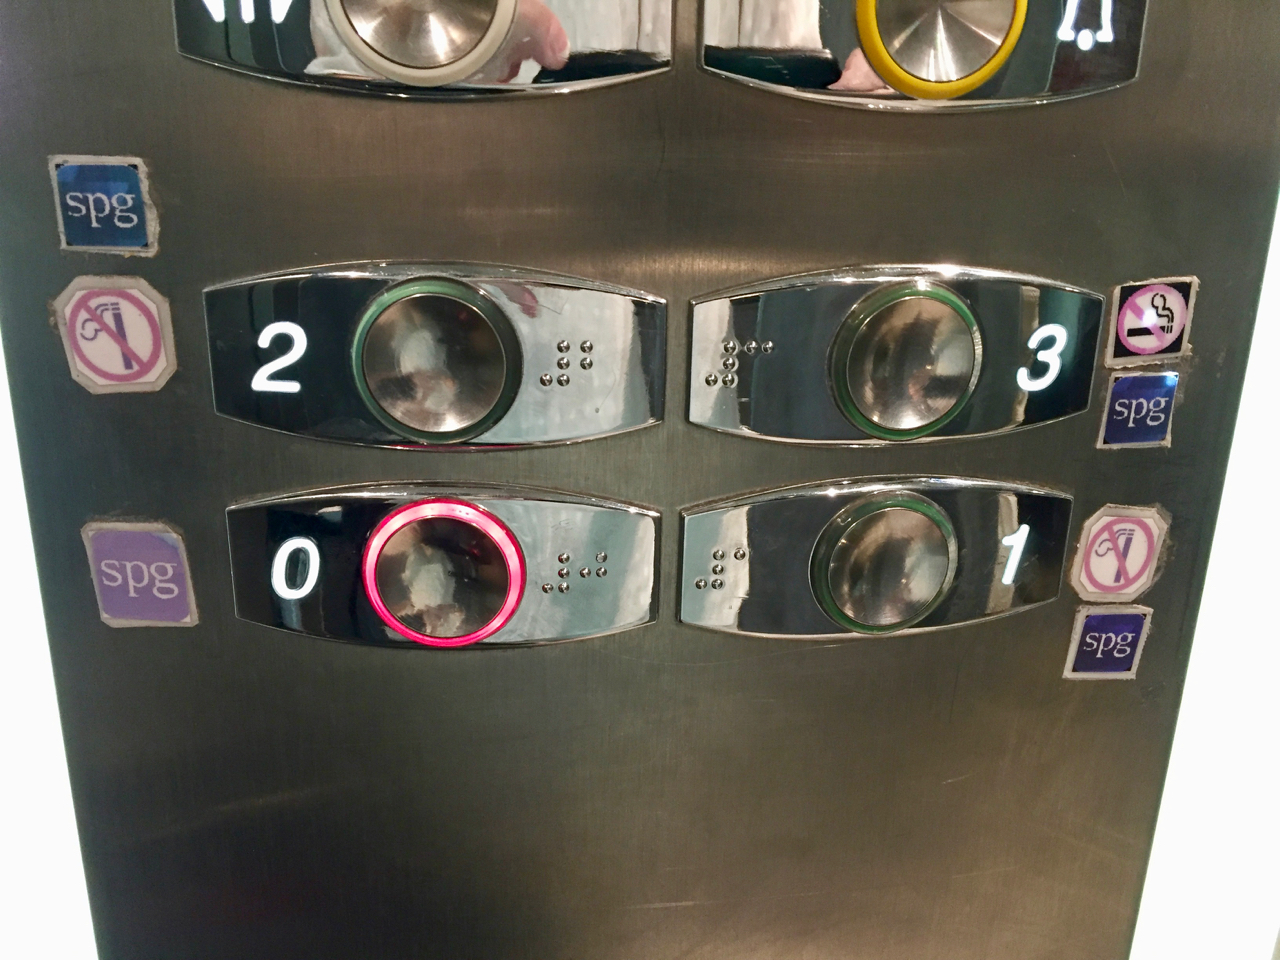 buttons on a elevator panel